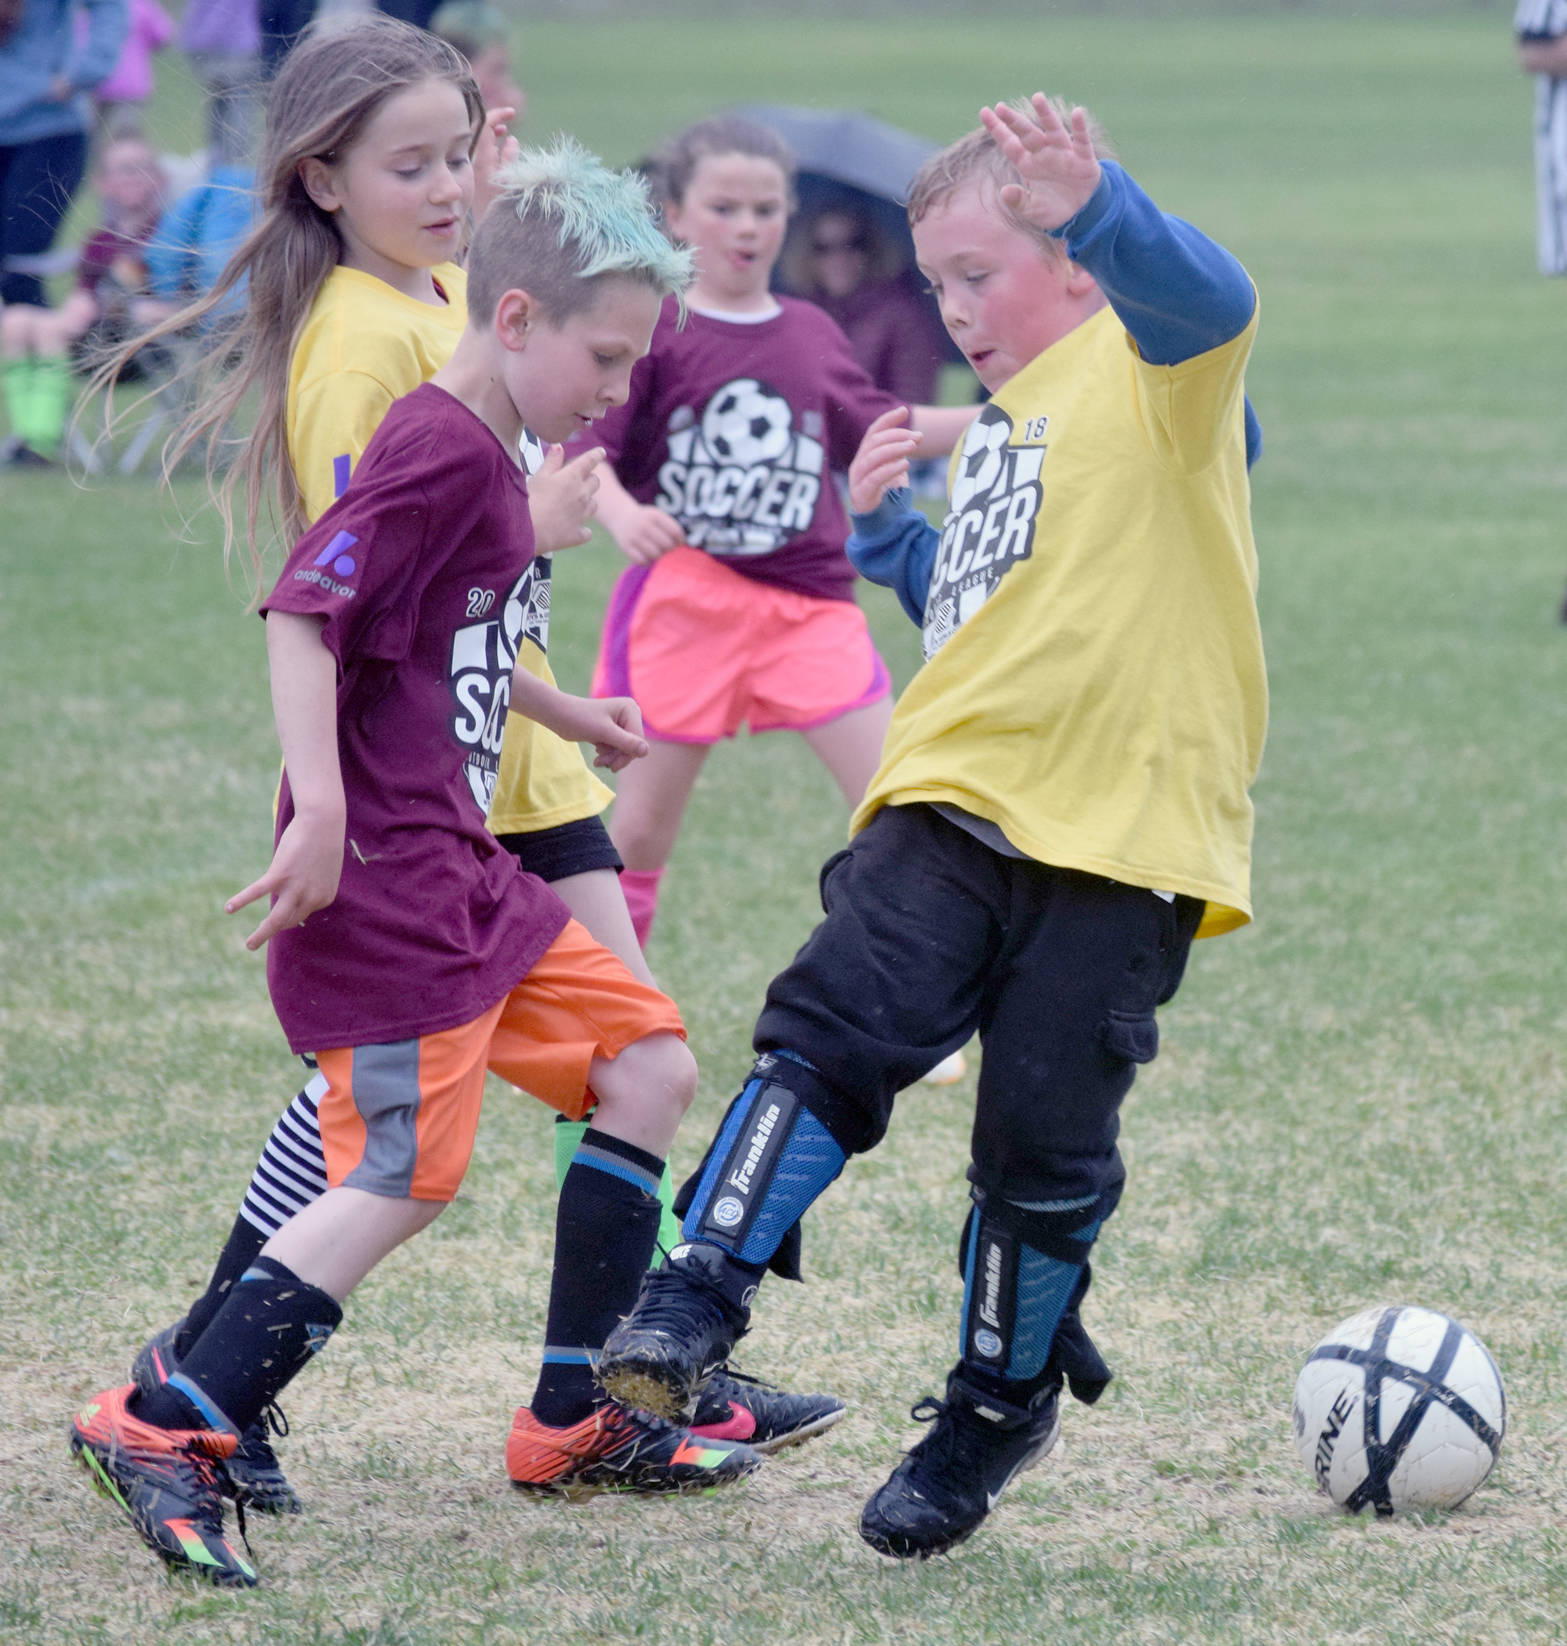 Eamon Traxler (in maroon) dribbles between Amy Sevast and Elijah Stanton on Tuesday, June 19, 2018, in Boys and Girls Club soccer at Kenai Middle School. (Photo by Jeff Helminiak/Peninsula Clarion)